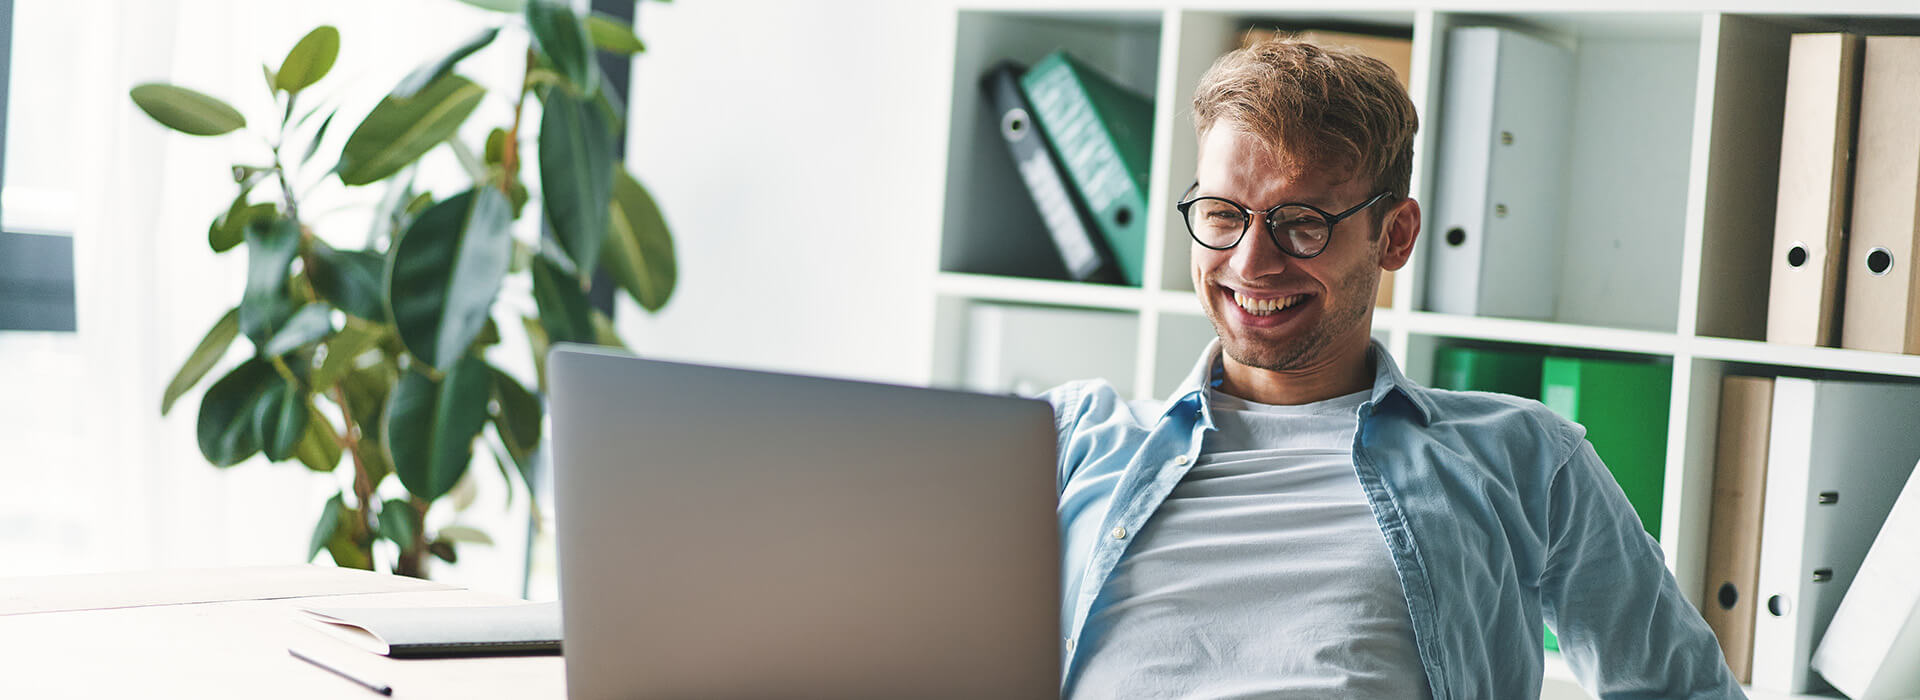 man leaning back in chair laughing at laptop banner